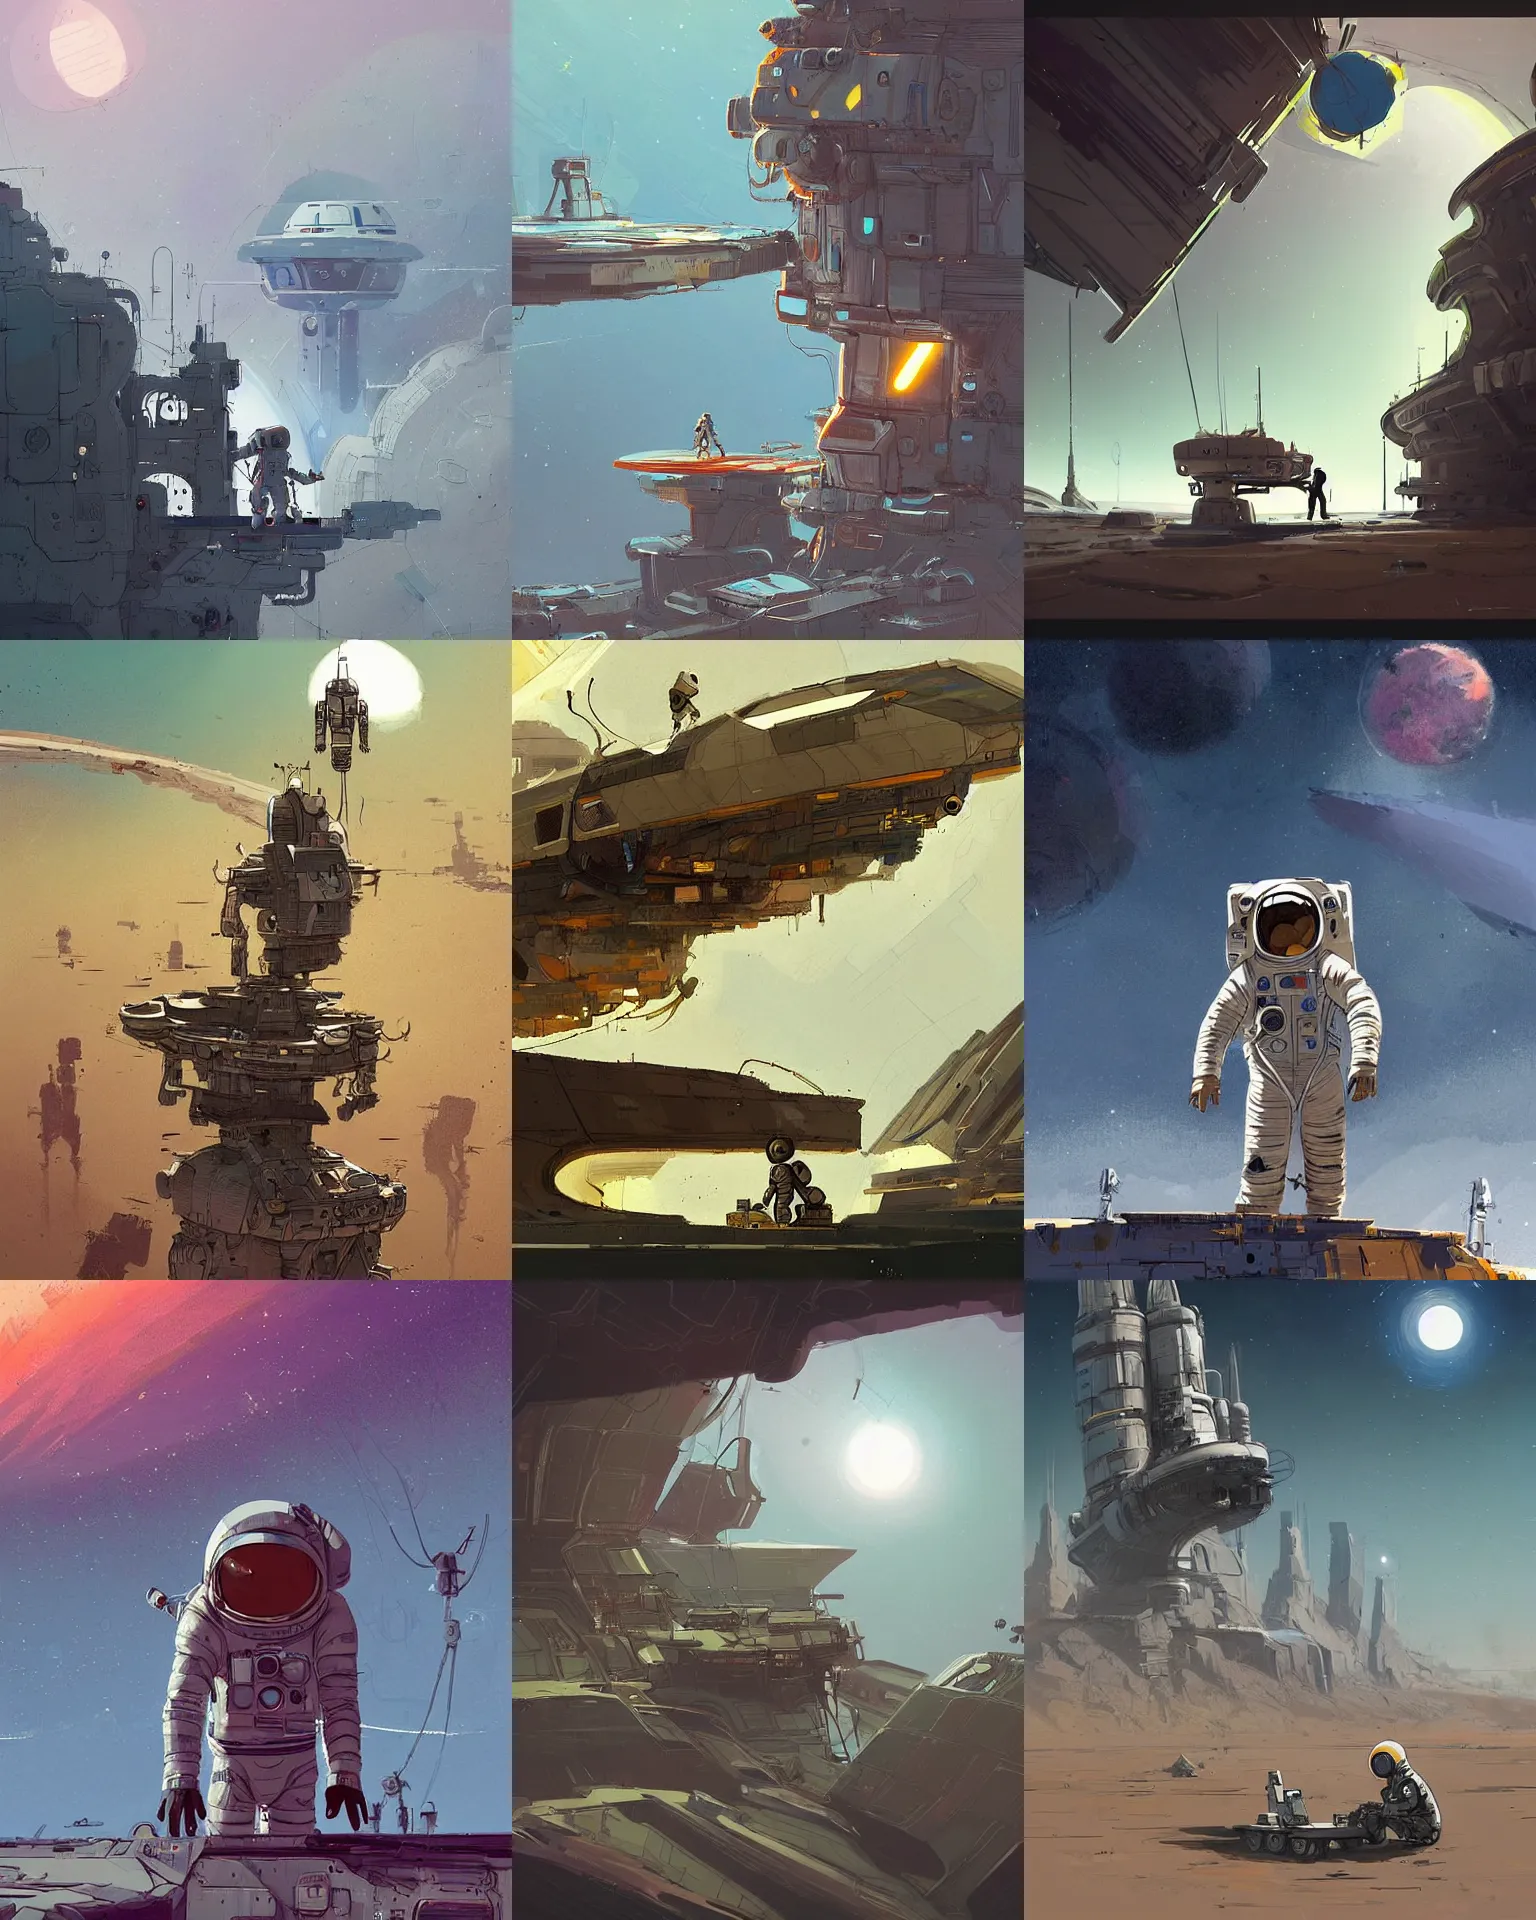 Prompt: An epic digital art of an astronaut alone on an unknown planet trying to repair his spaceship, Artwork by Ian McQue, trending on ArtStation